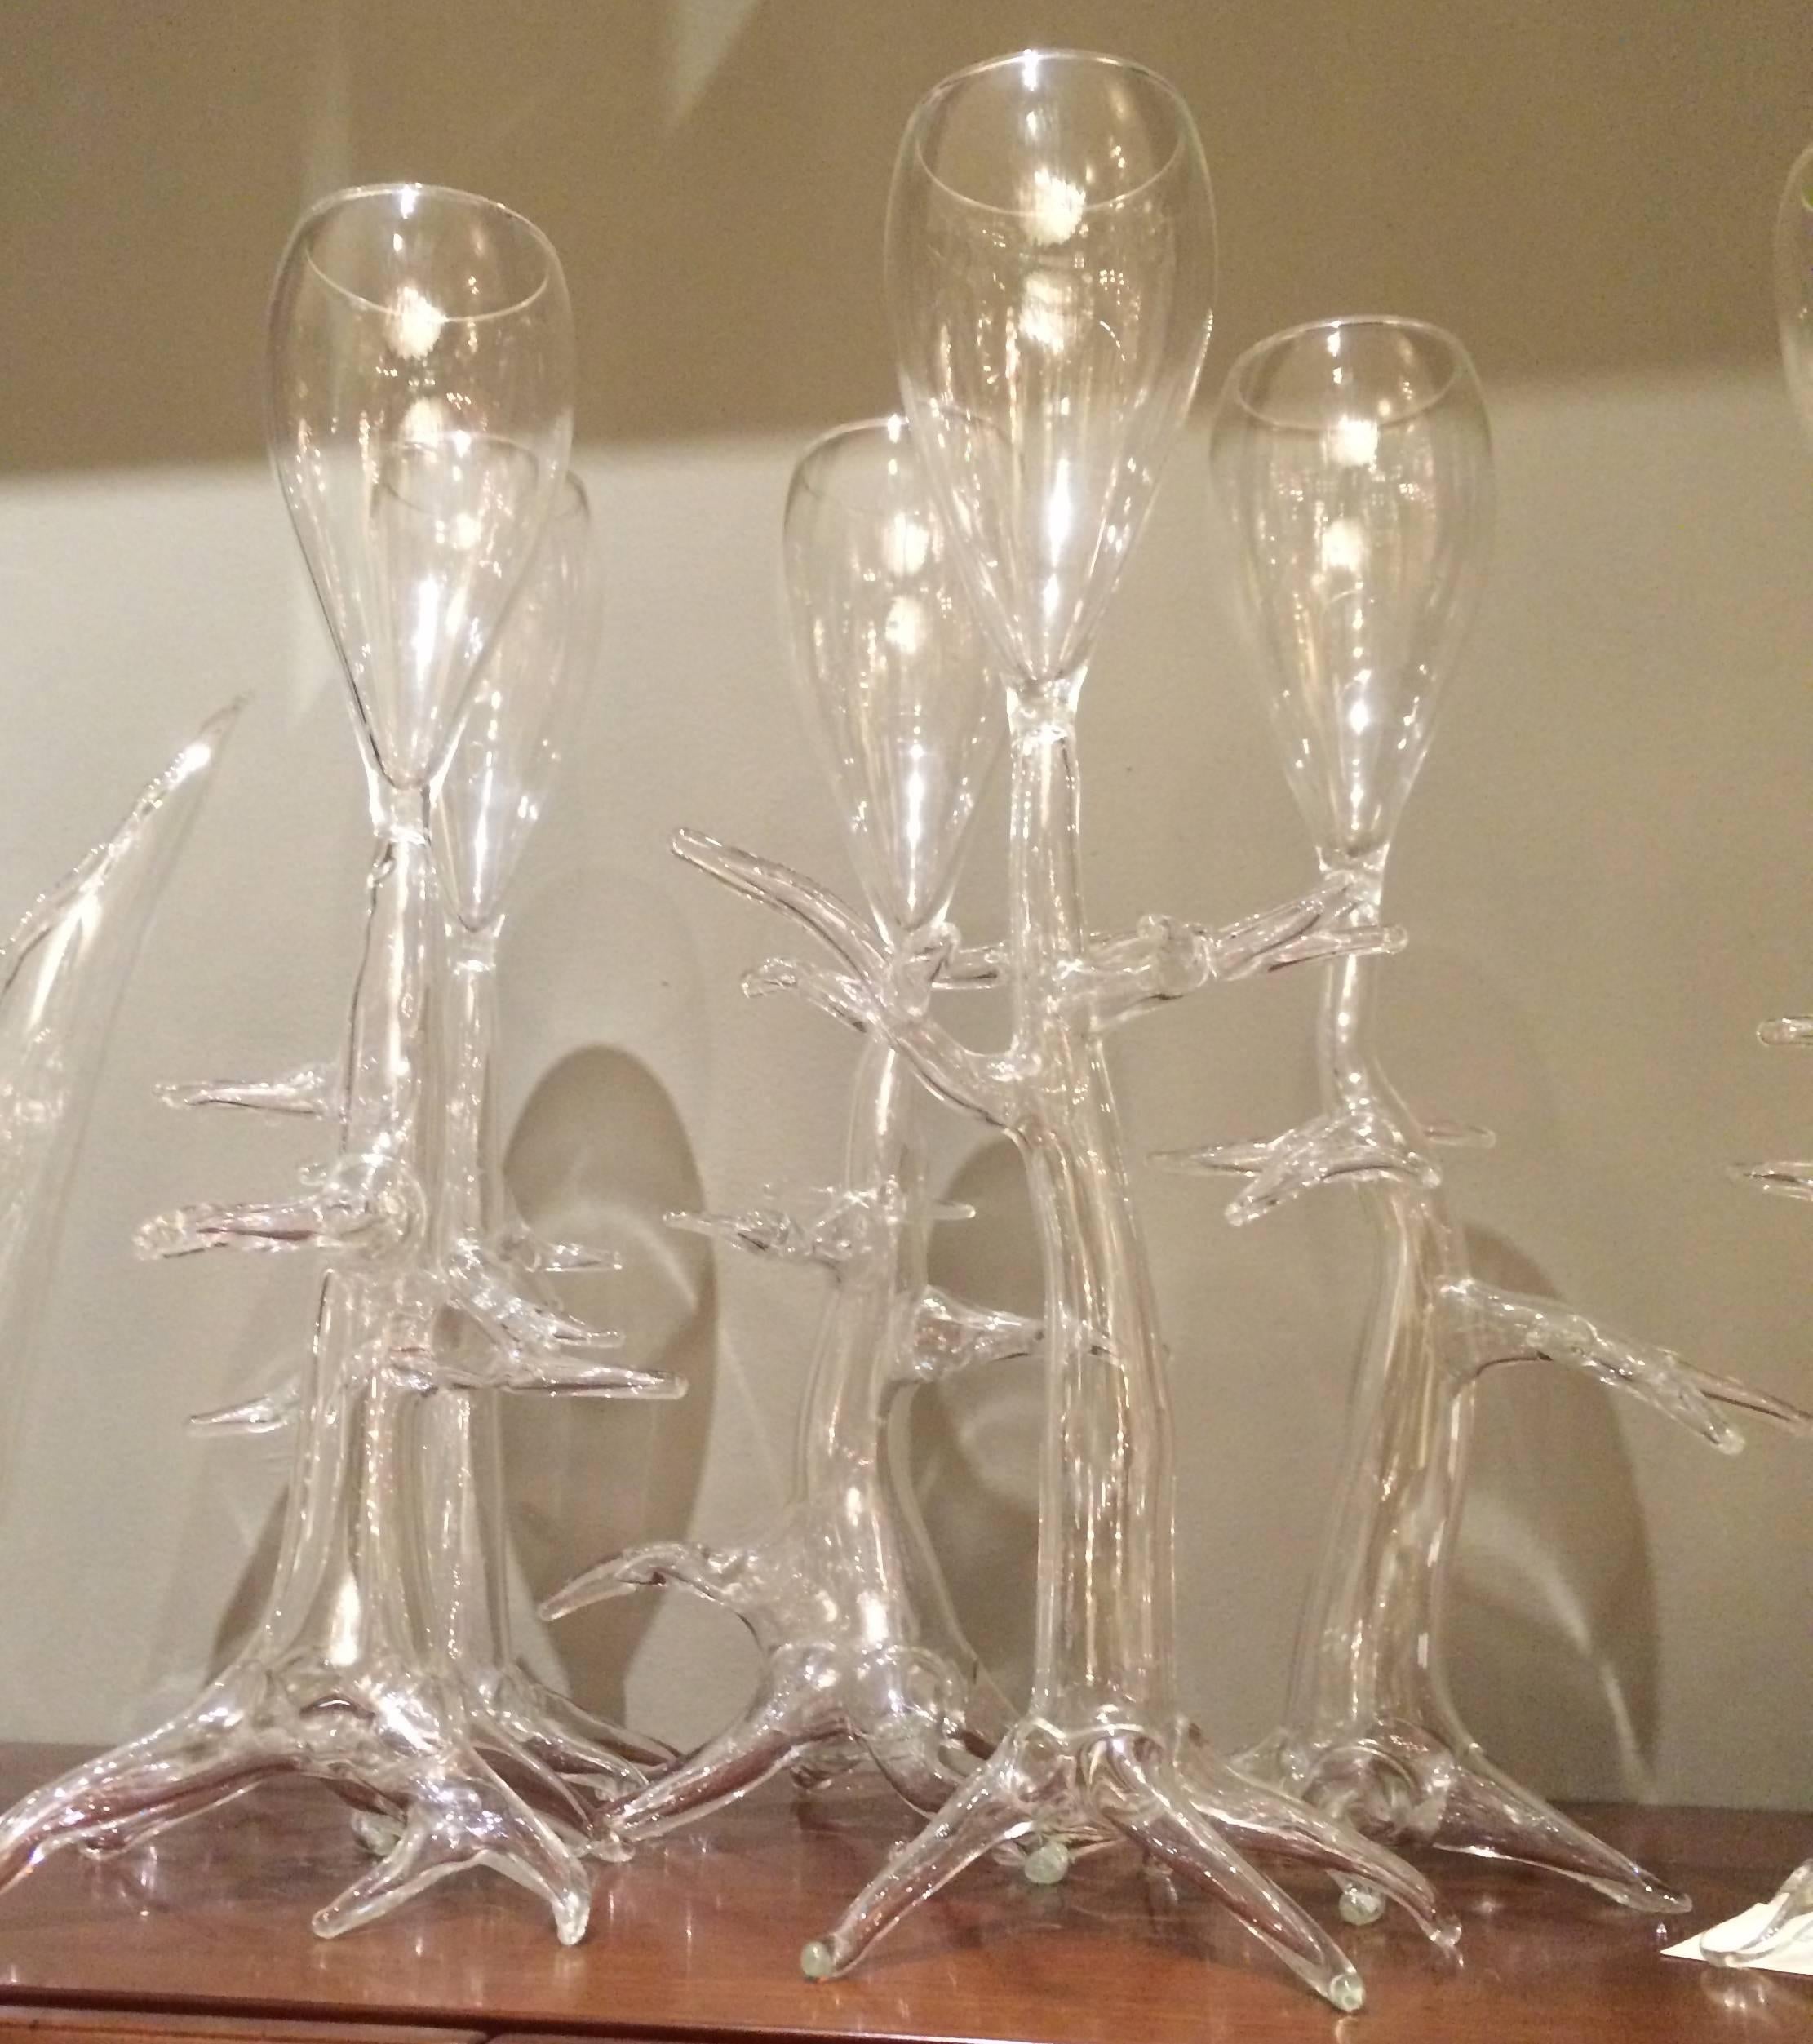 Handblown clear glass vessels with branching, arboreal shafts, created by the contemporary glass artist Crestani, each signed and dated. 
Measures: Glass height 14”.   Pitcher height 13”, width 13”, depth 7”.

OUR REFERENCE N6424